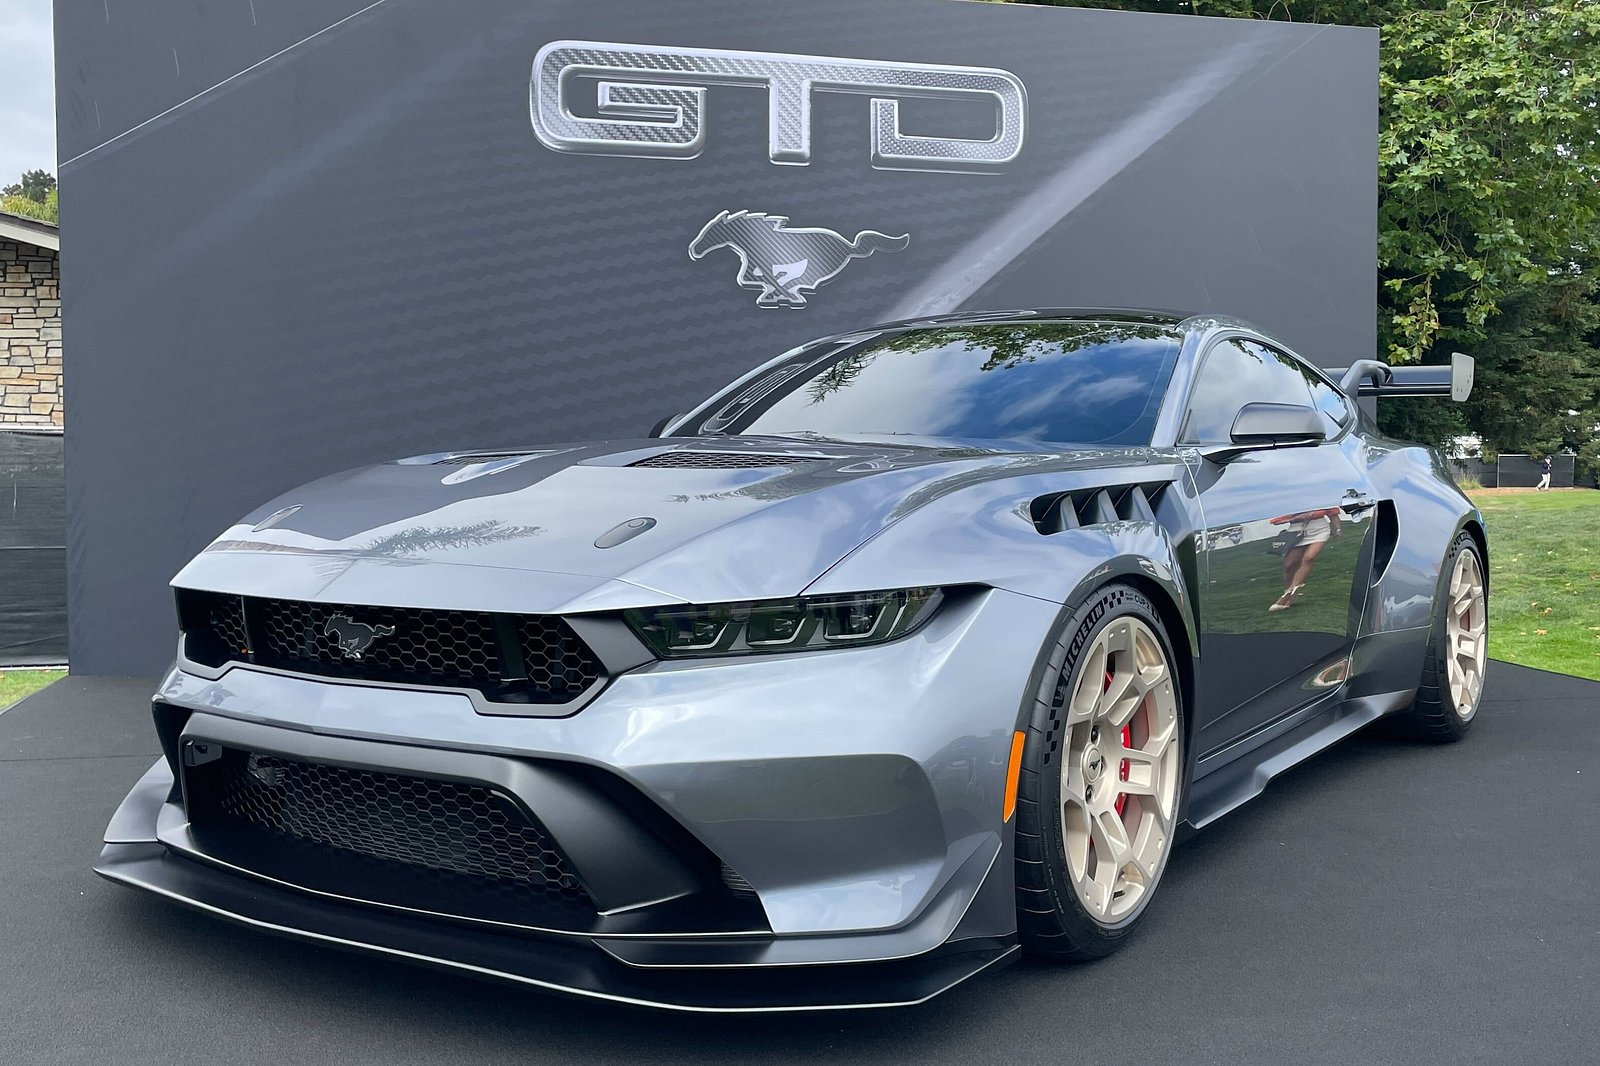 Ford Mustang GTD Revealed As 800HP StreetLegal Supercar With 300k